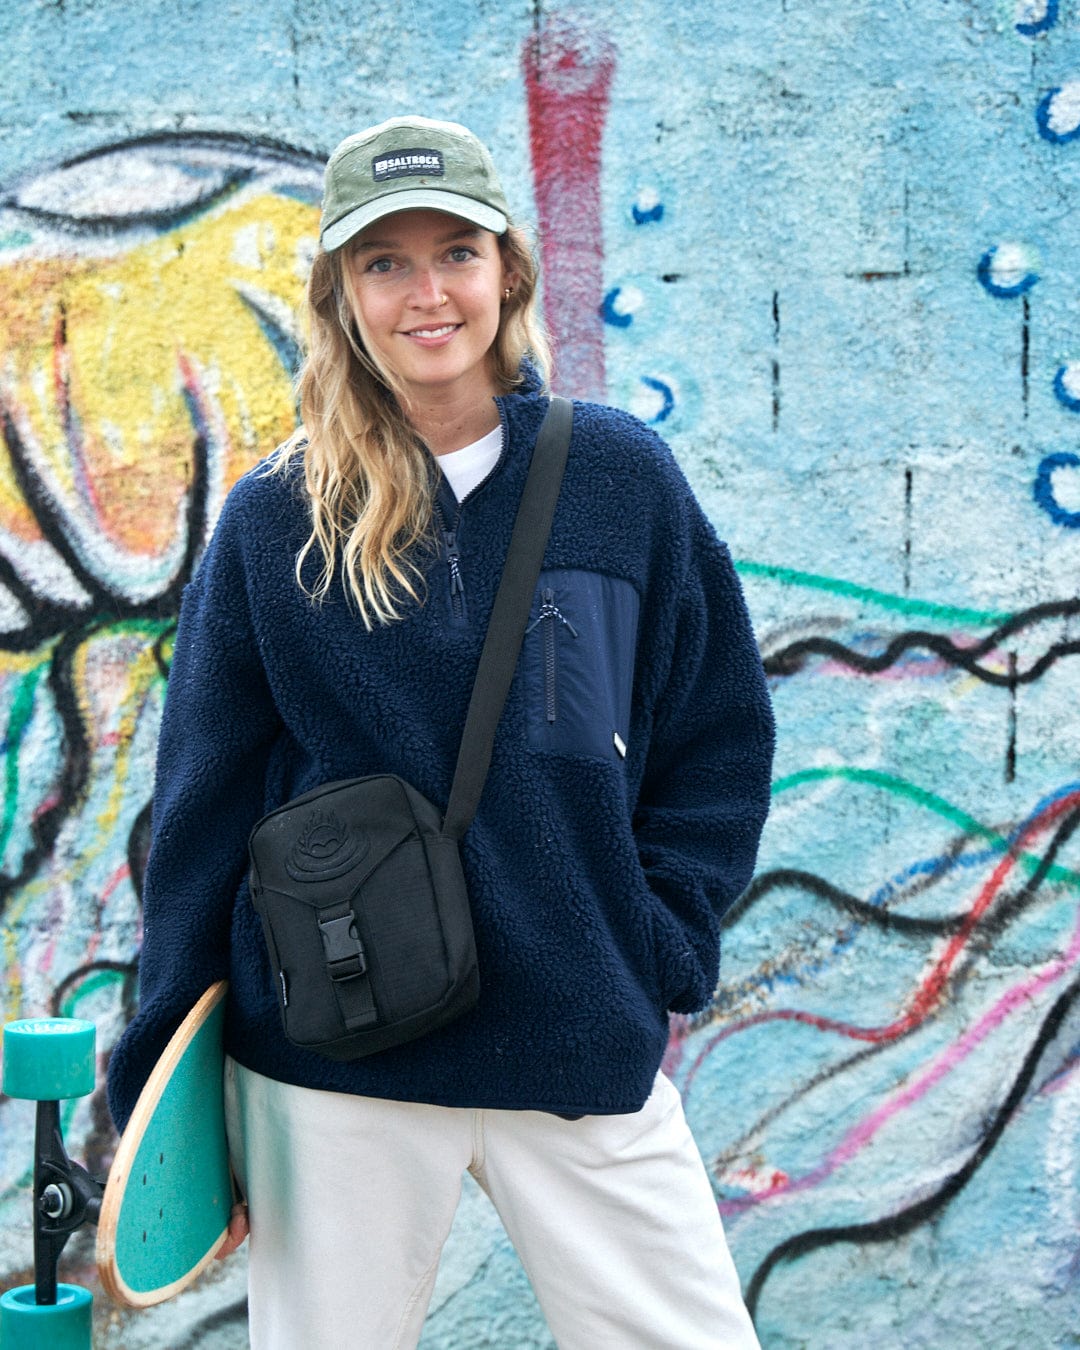 A woman holding a Zella - Womens 1/4 Neck Fleece - Dark Blue by Saltrock in front of a graffiti wall with zip details.